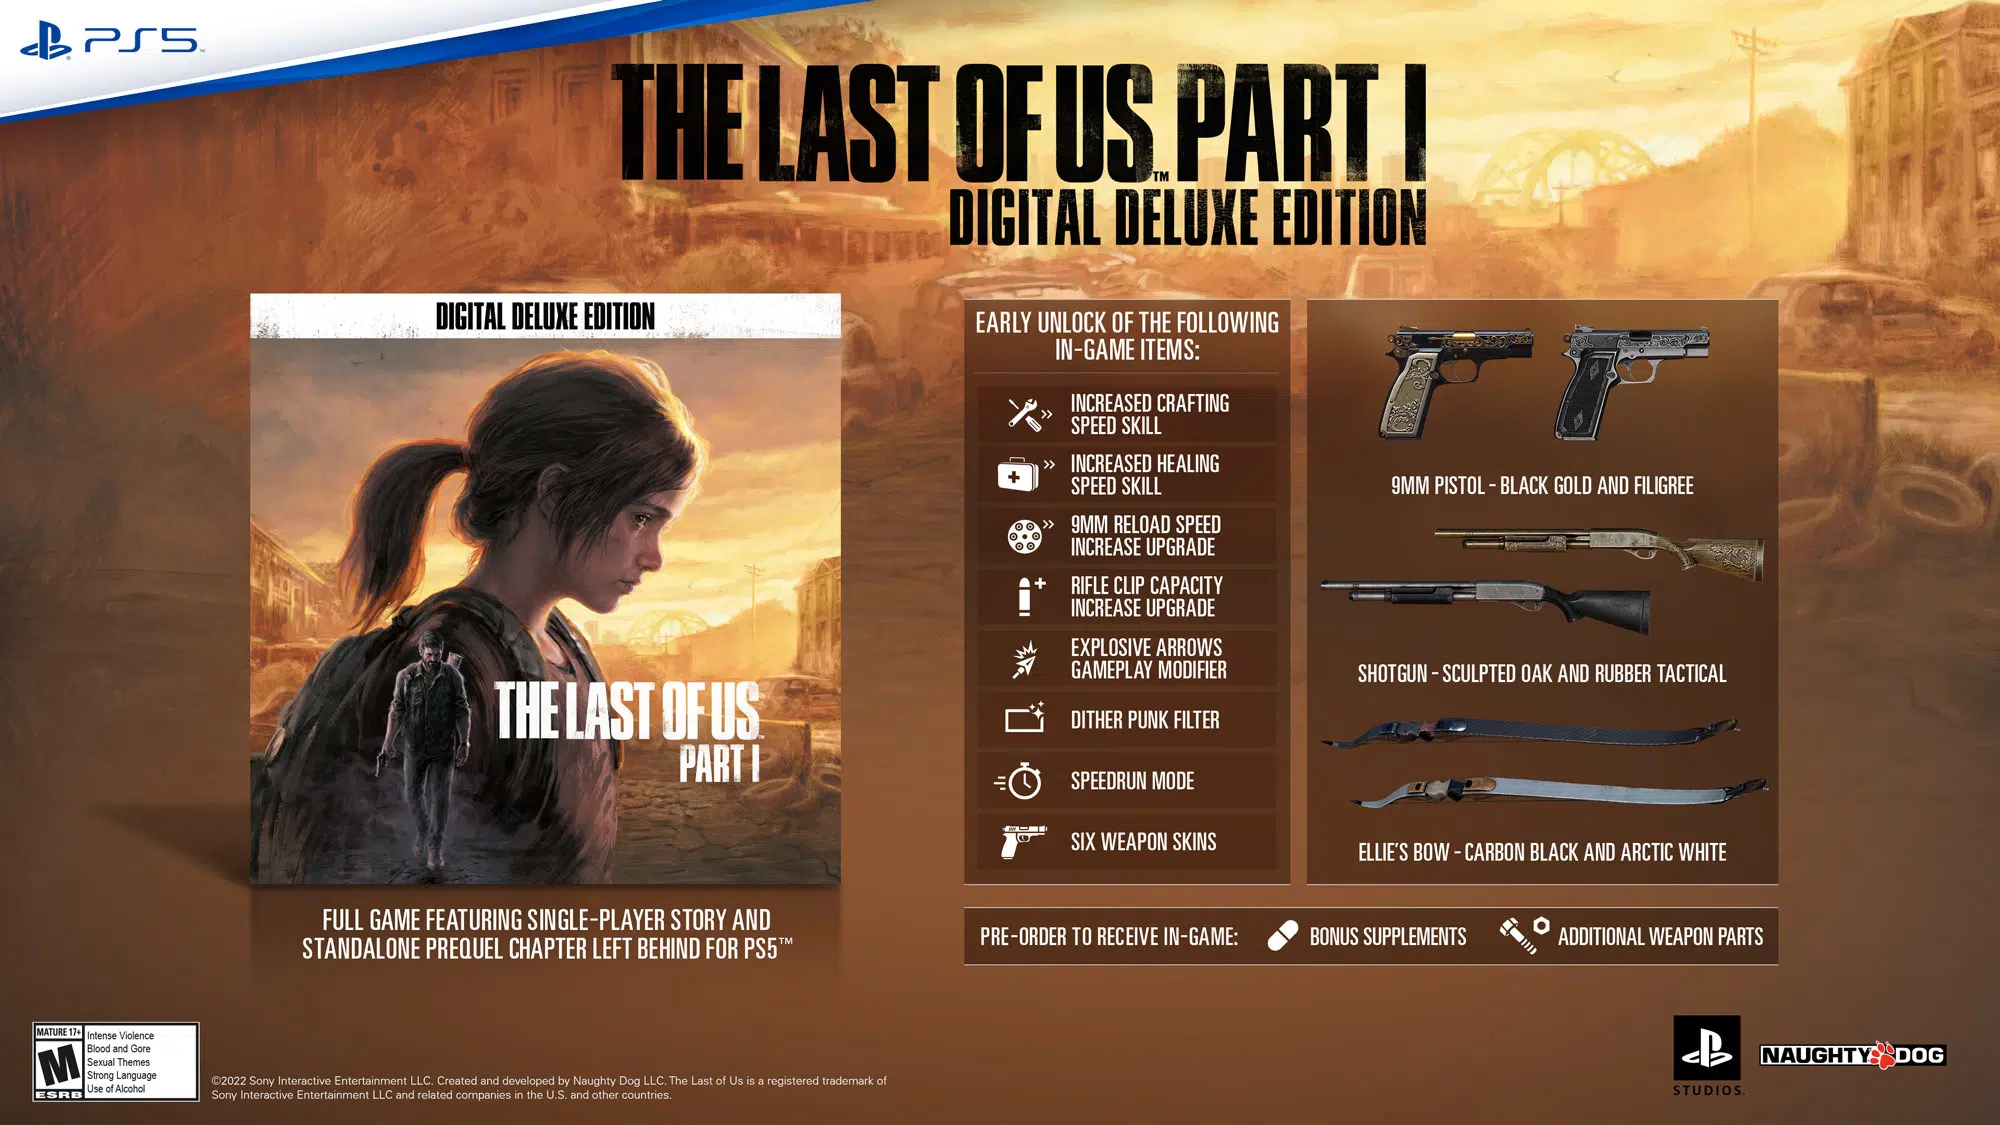 The Last of Part I Digital Deluxe Edition